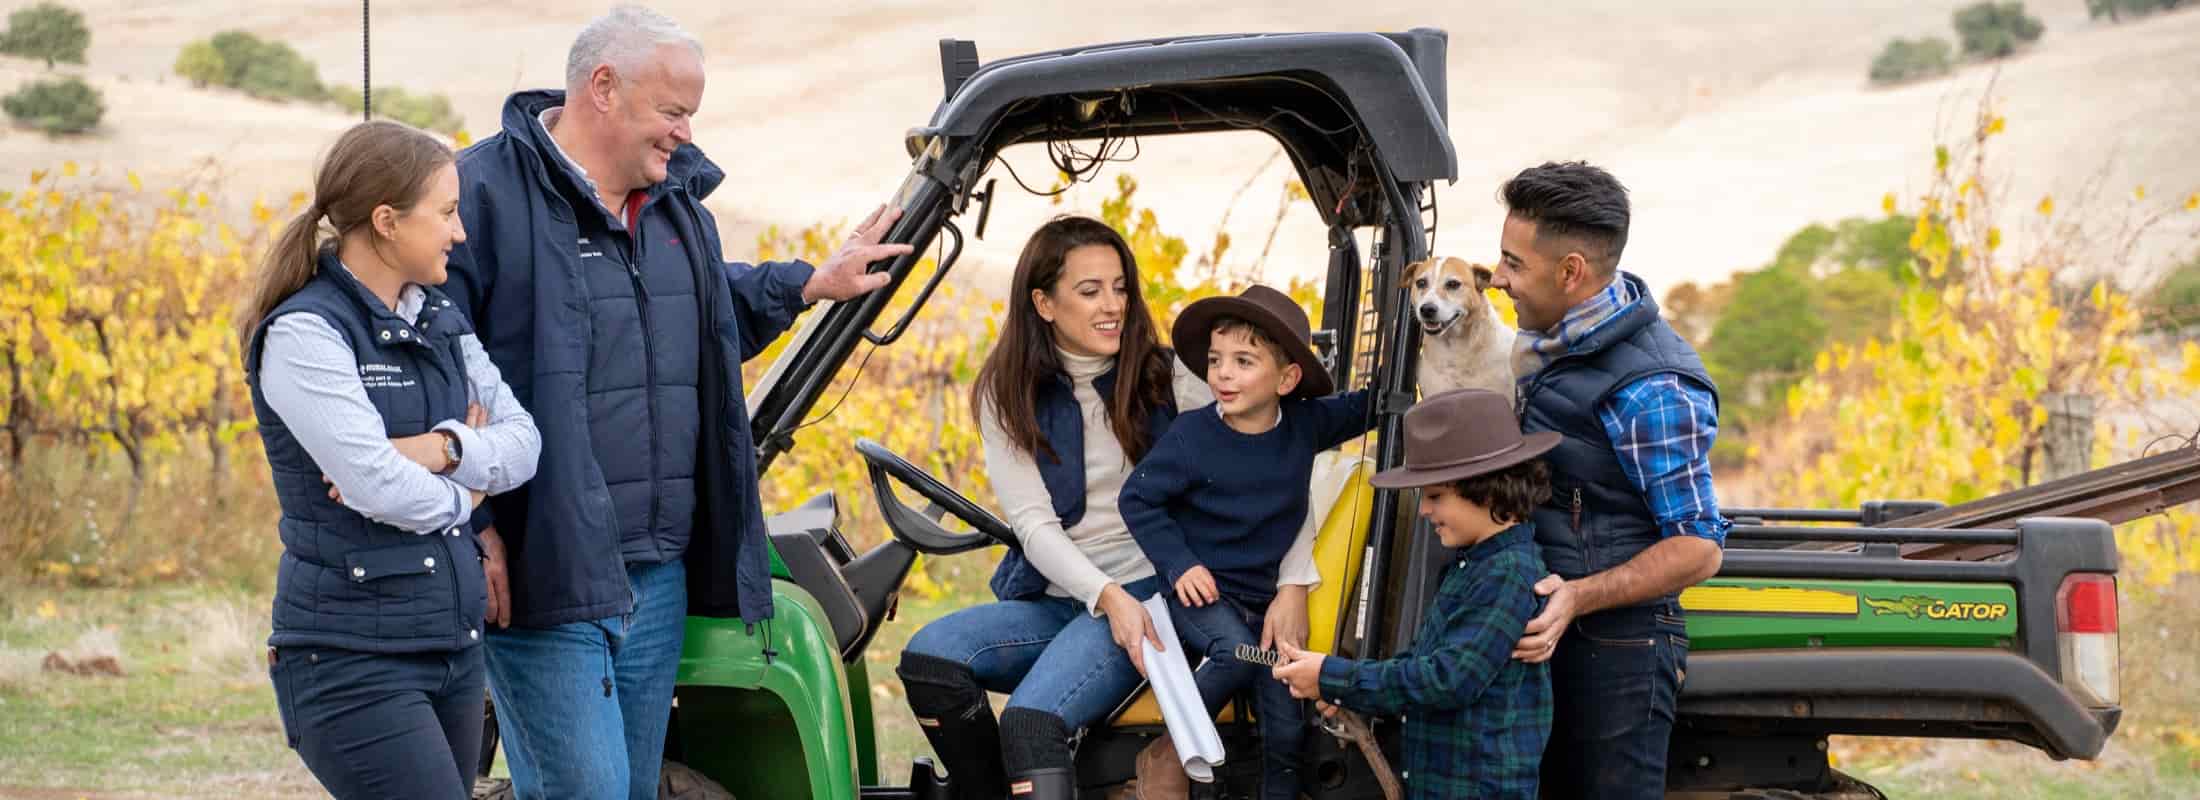 Image of rural family sitting and standing around farm equipment.